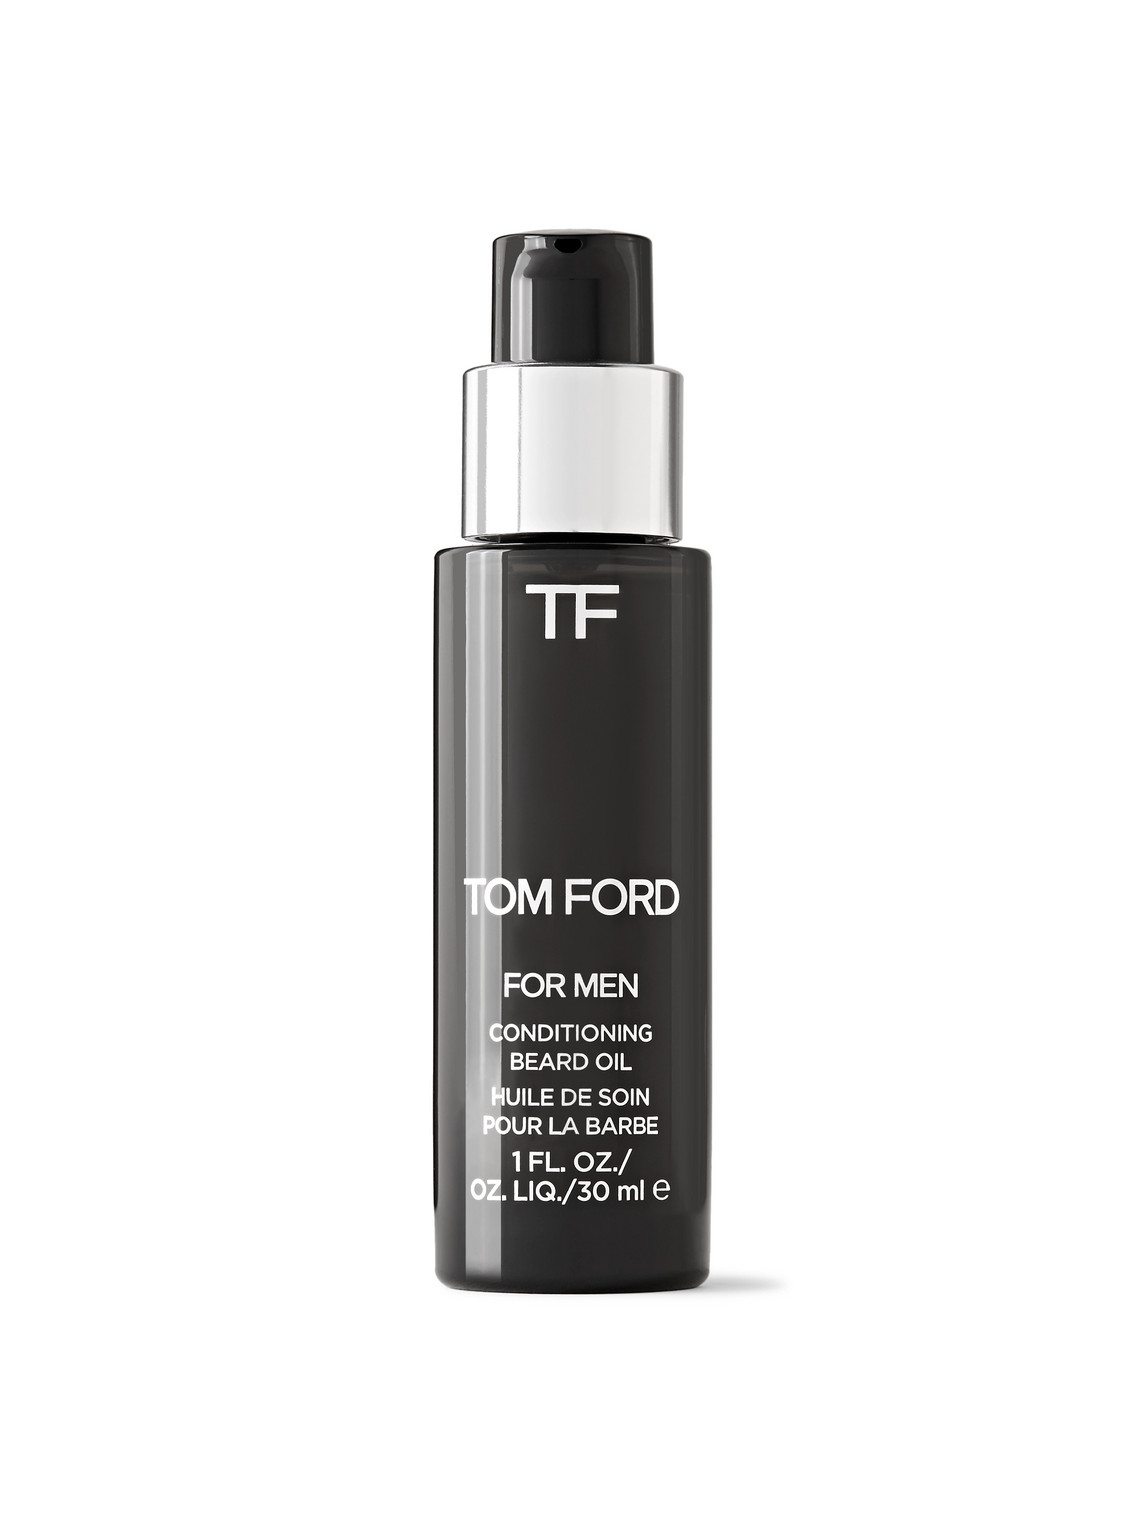 Tom Ford Oud Wood Conditioning Beard Oil, 30ml In Colorless